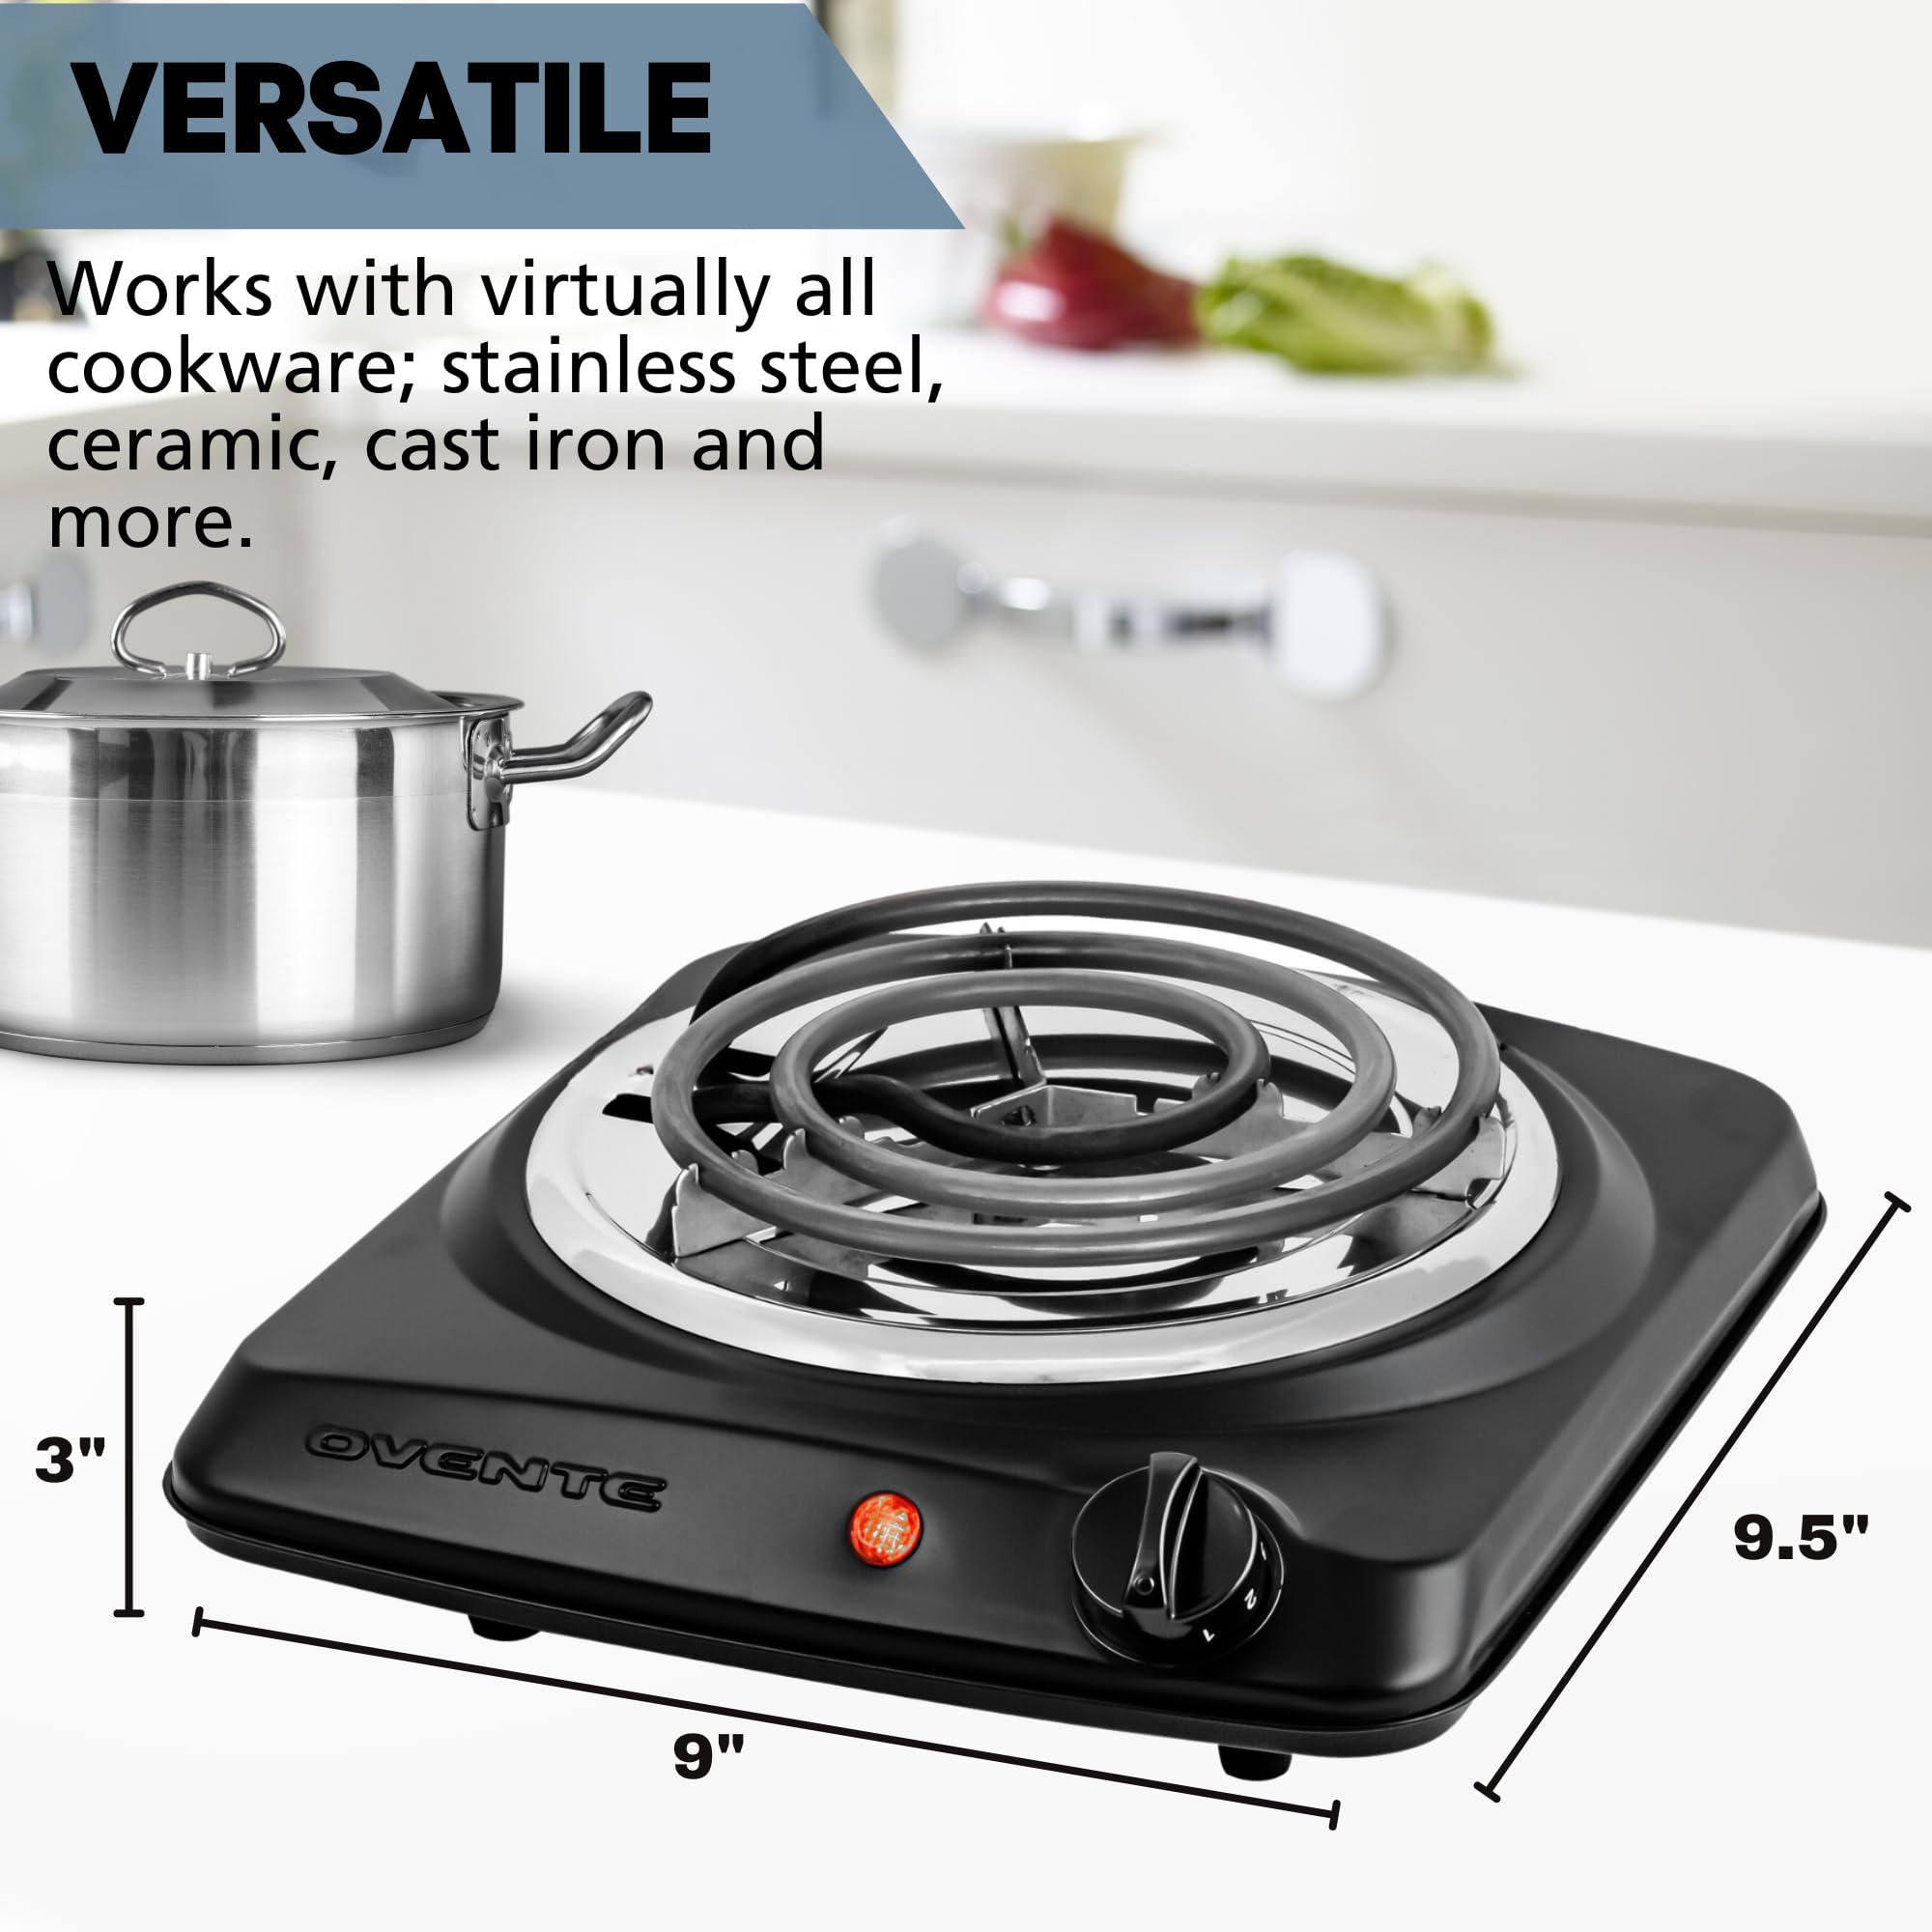 OVENTE Electric Single Coil Burner 6 Inch Hot Plate Cooktop with 5 Level Temperature Control and Easy to Clean Stainless Steel Base, Portable Countertop Stove for Home, Dorm or Office, Black BGC101B